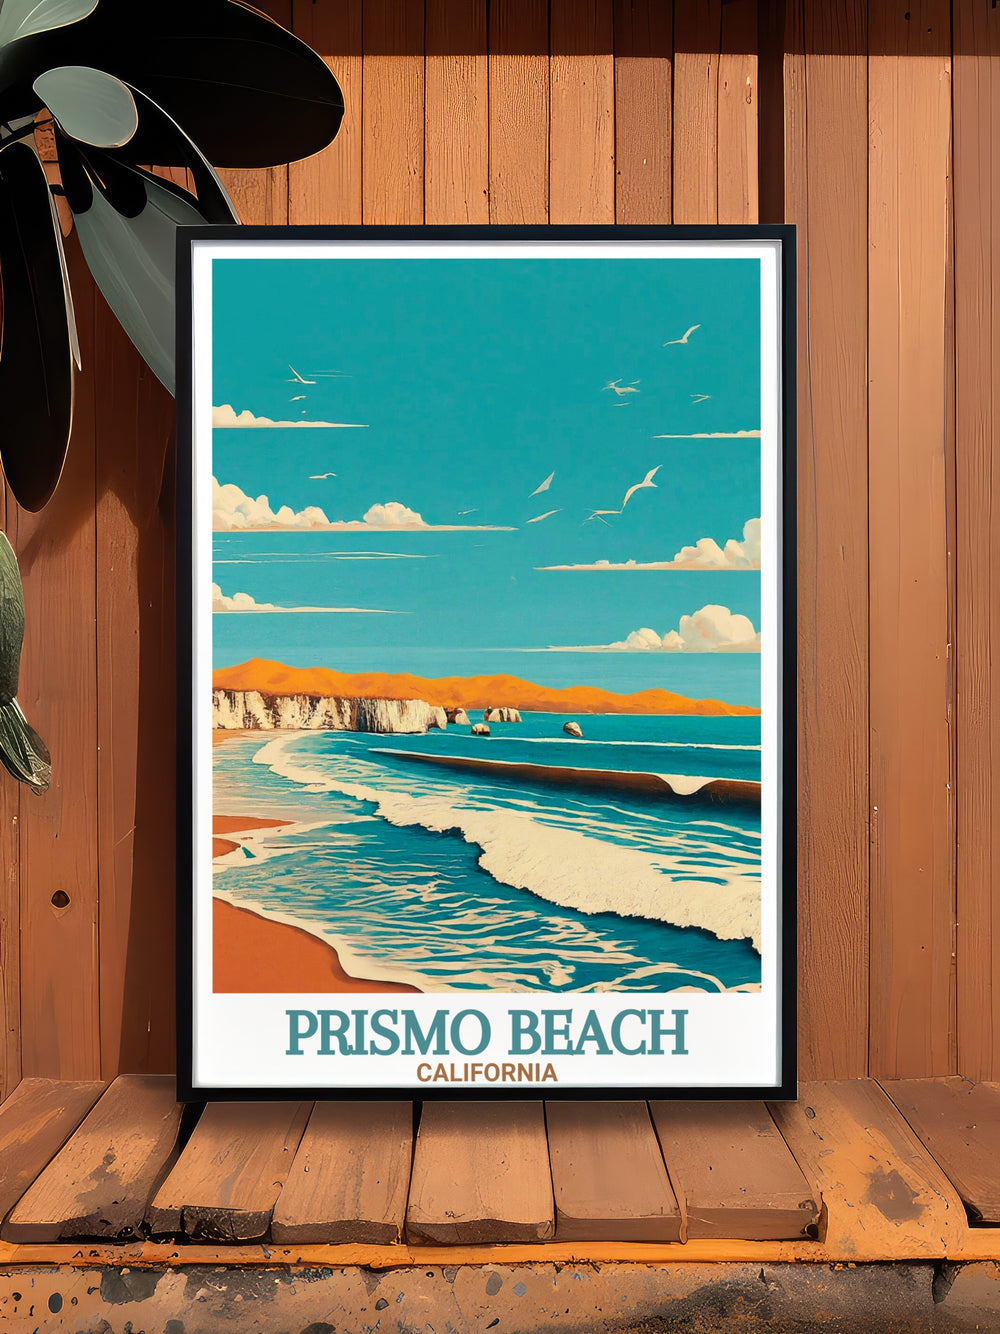 Beautiful Pismo Beach Art in a California Print ideal for adding coastal charm to your living space Pismo State Beach artwork brings elegance and tranquility to any room